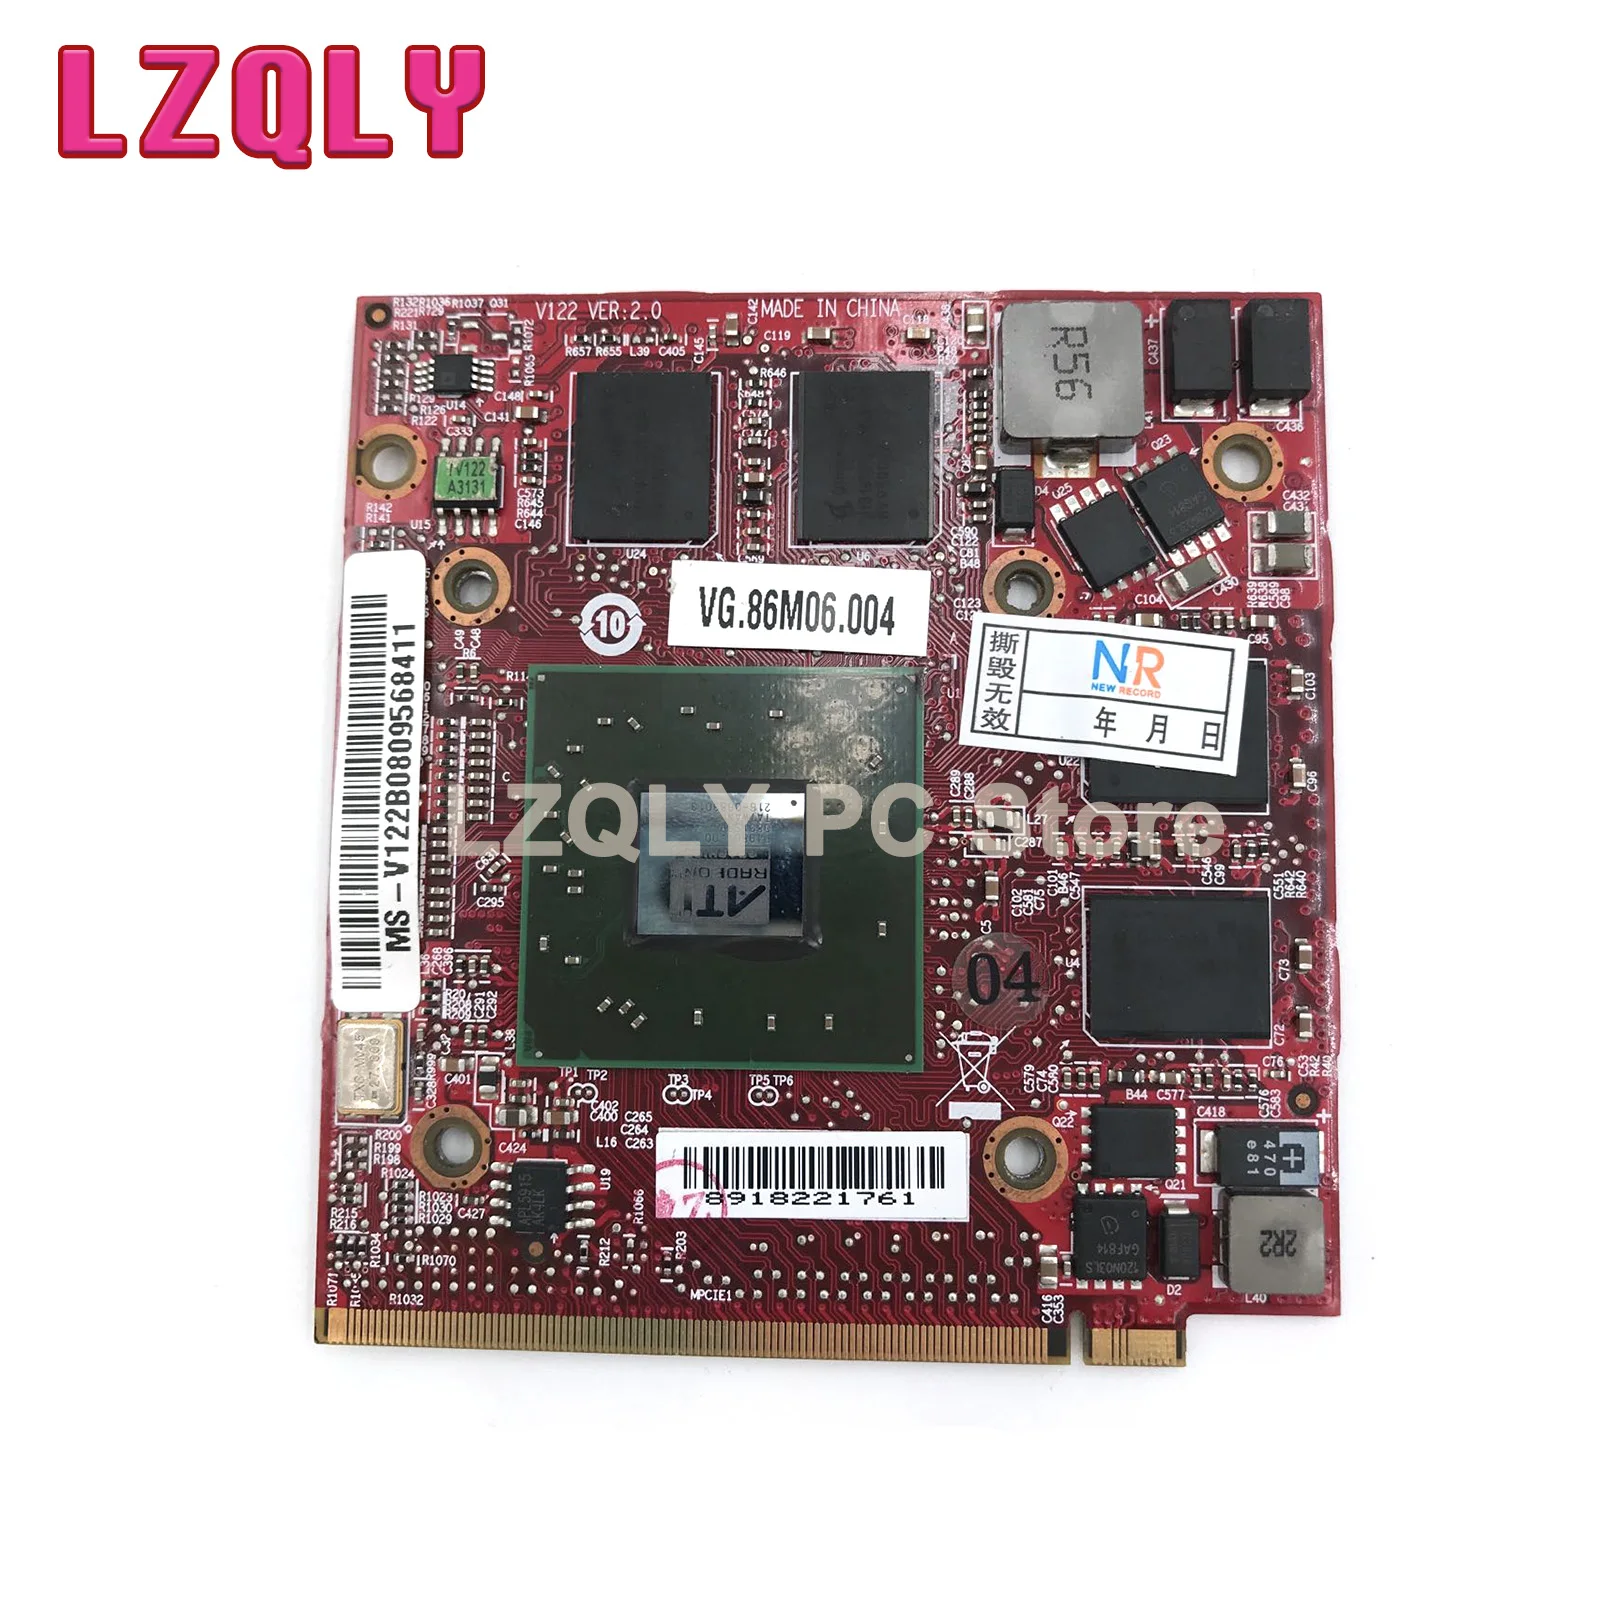 

For Acer Apire 8920G 8920 Video Card